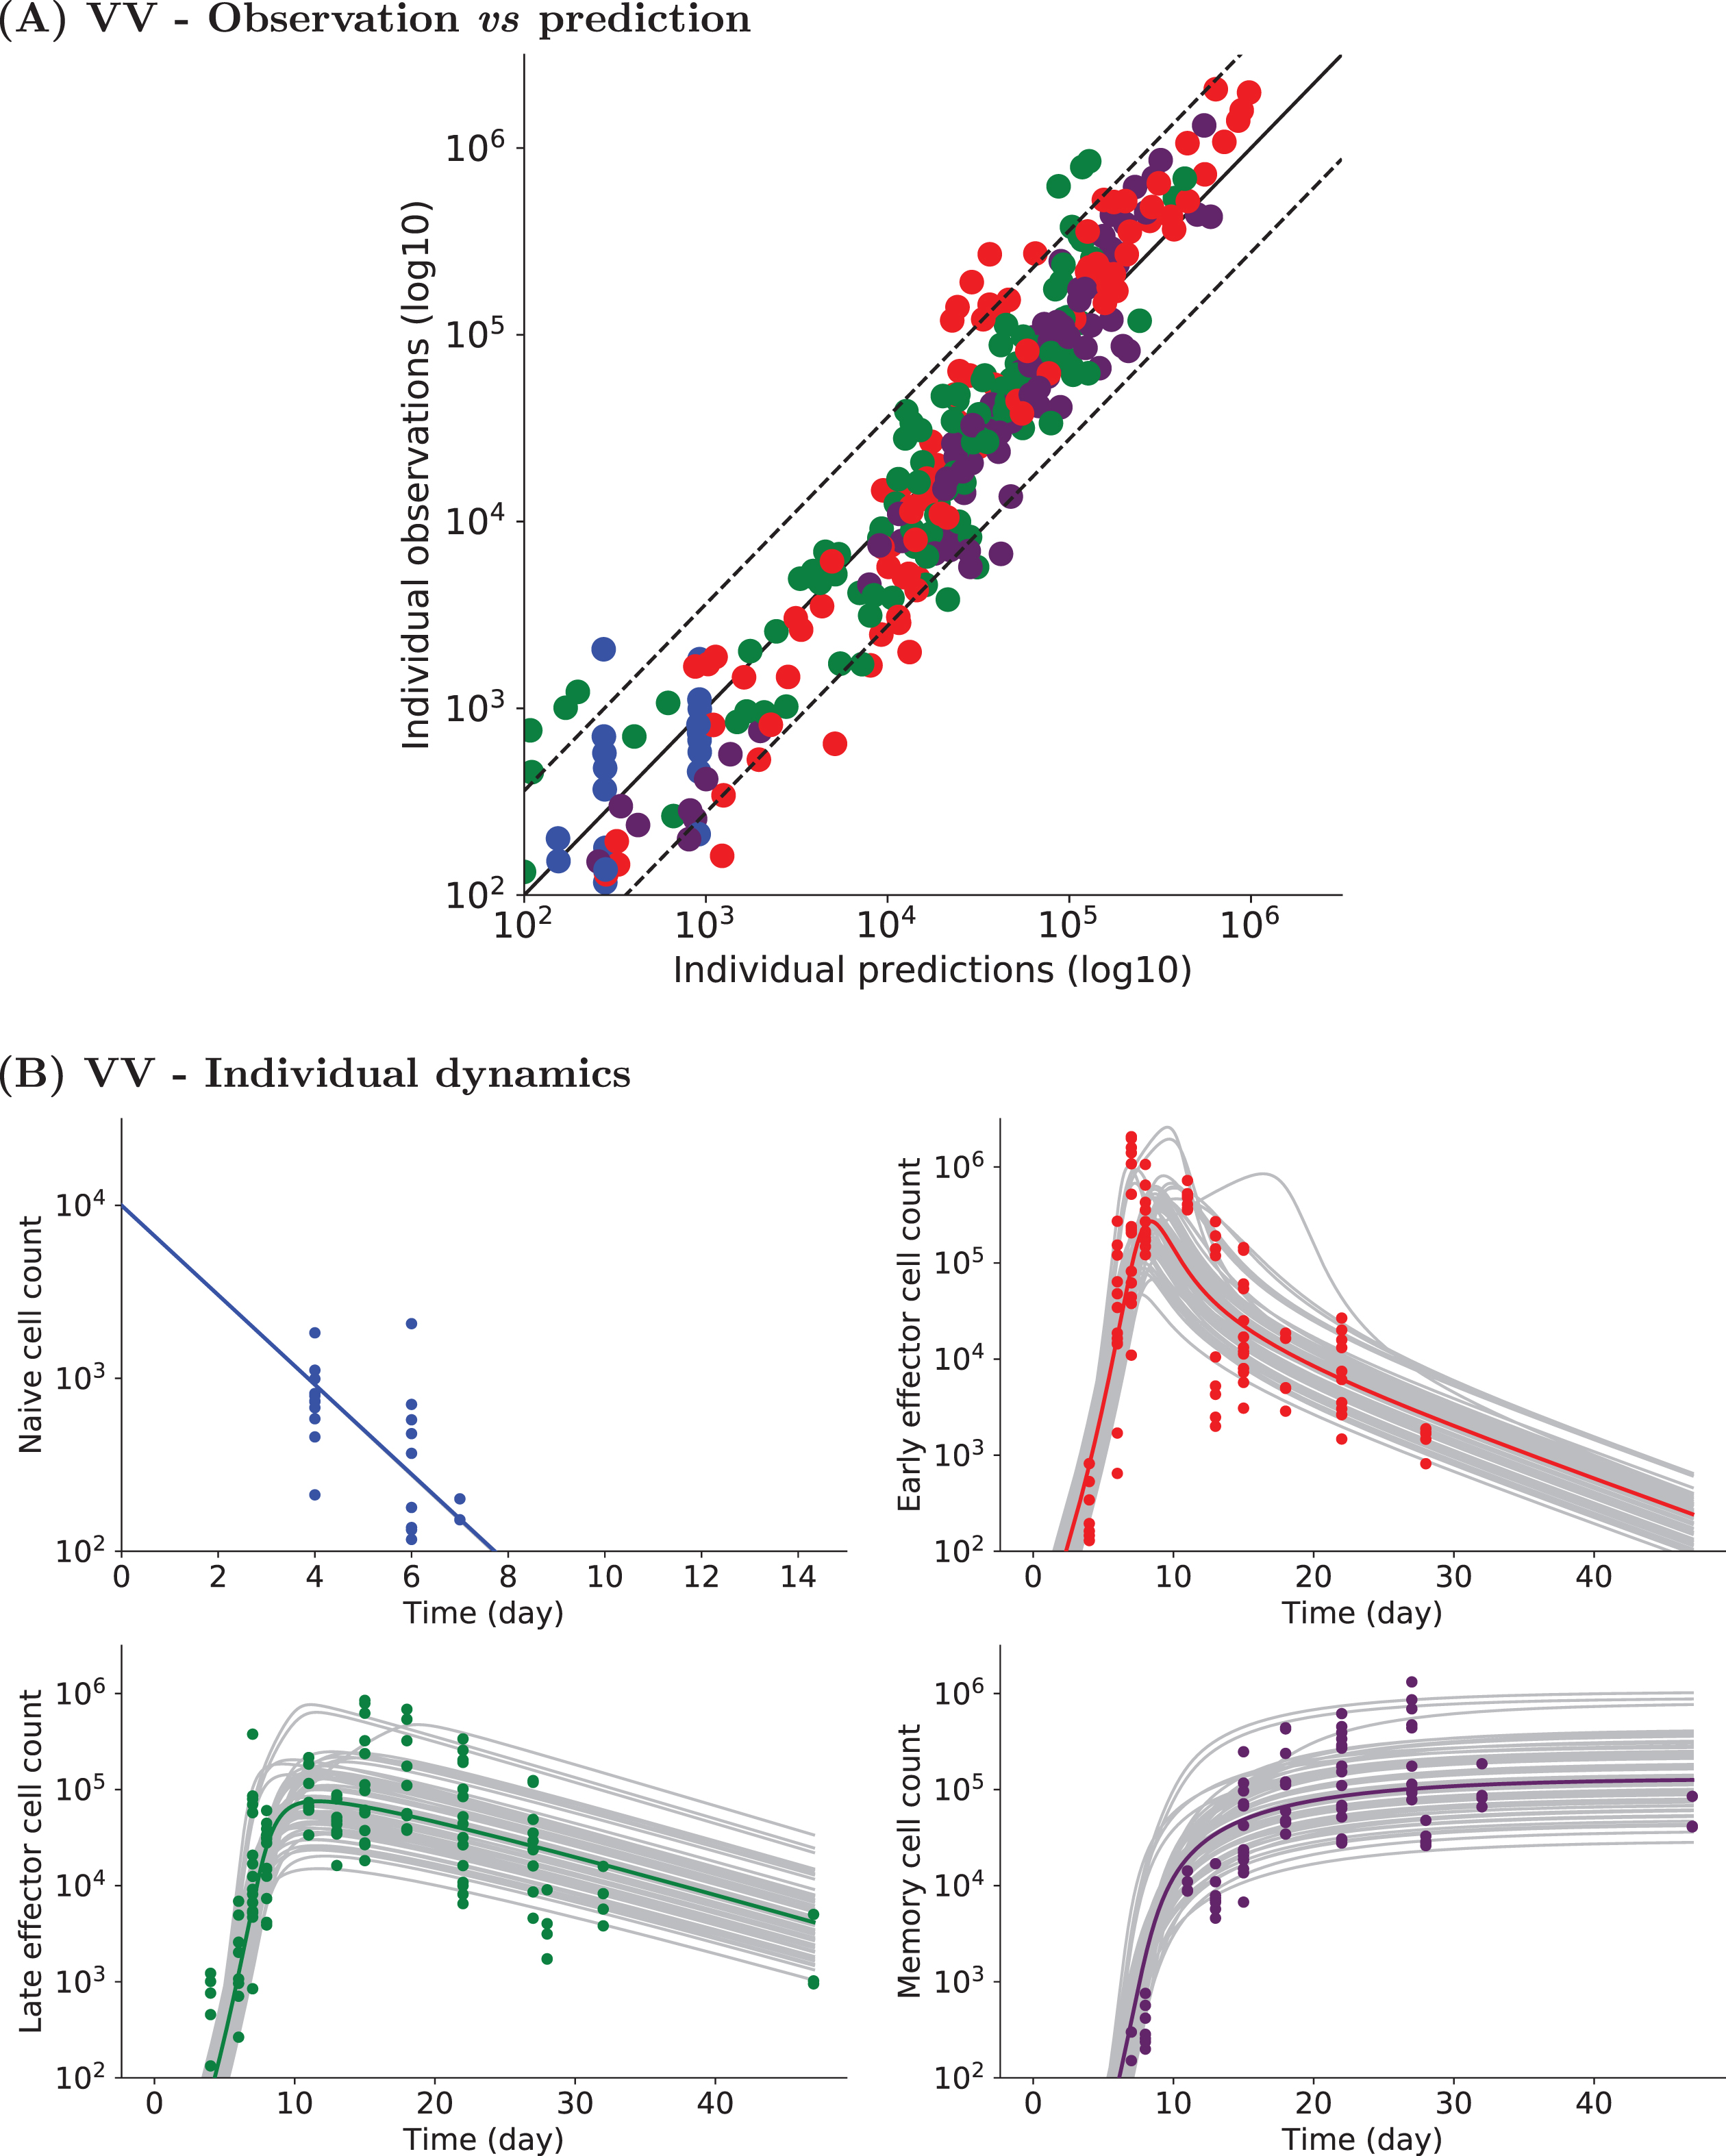 Experimental and simulated individual cell counts for VV data set 1 (logarithmic scale). (A) Observed vs predicted values. For each CD8 T cell count experimental point, the prediction is obtained by simulating System (2). Naive (blue), early effector (red), late effector (green), and memory (purple) cell counts are depicted. Dashed lines represent the 90th percentile of the difference between observed and predicted values, and the solid black line is the curve y = x. (B) Naive (upper left, blue), early effector (upper right, red), late effector (lower left, green) and memory (lower right, purple) cell counts up to D47pi. Experimental measurements are represented by colored dots (same color code), simulated individual trajectories by grey lines, and the average population dynamics by a straight colored line (same color code).